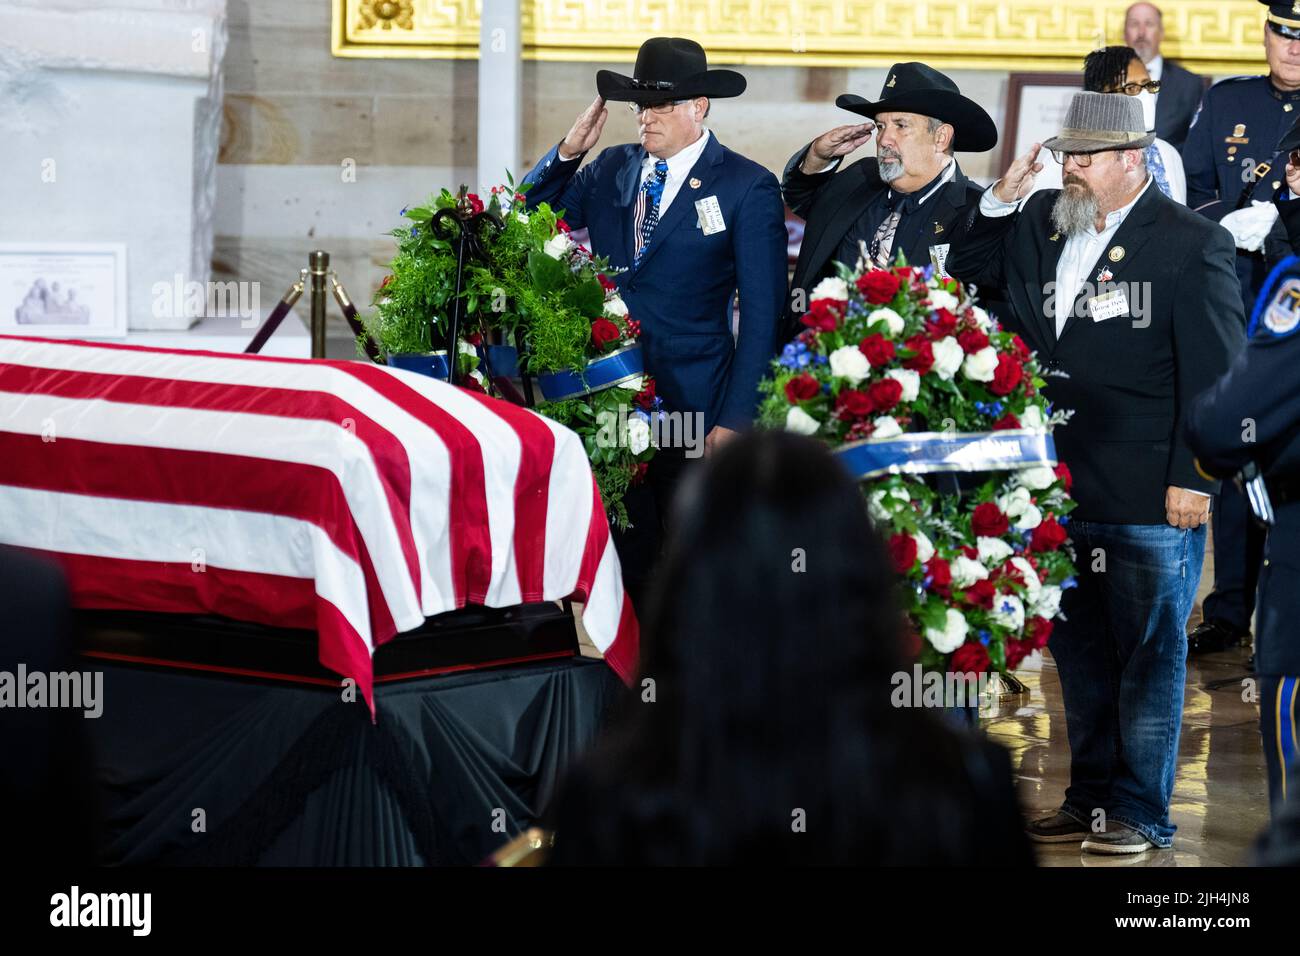 Washington, USA. 14th July, 2022. UNITED STATES - JULY 14: Veterans from Texas pay respects to Hershel Woodrow “Woody” Williams, the last Medal of Honor recipient of World War II to pass away, in the U.S. Capitol Rotunda as his remains lie in honor in Washington, DC, on Thursday, July 14, 2022. Williams, who passed away at age 98, received the award for action in the Battle of Iwo Jima. (Photo by Tom Williams/Pool/Sipa USA) Credit: Sipa USA/Alamy Live News Stock Photo